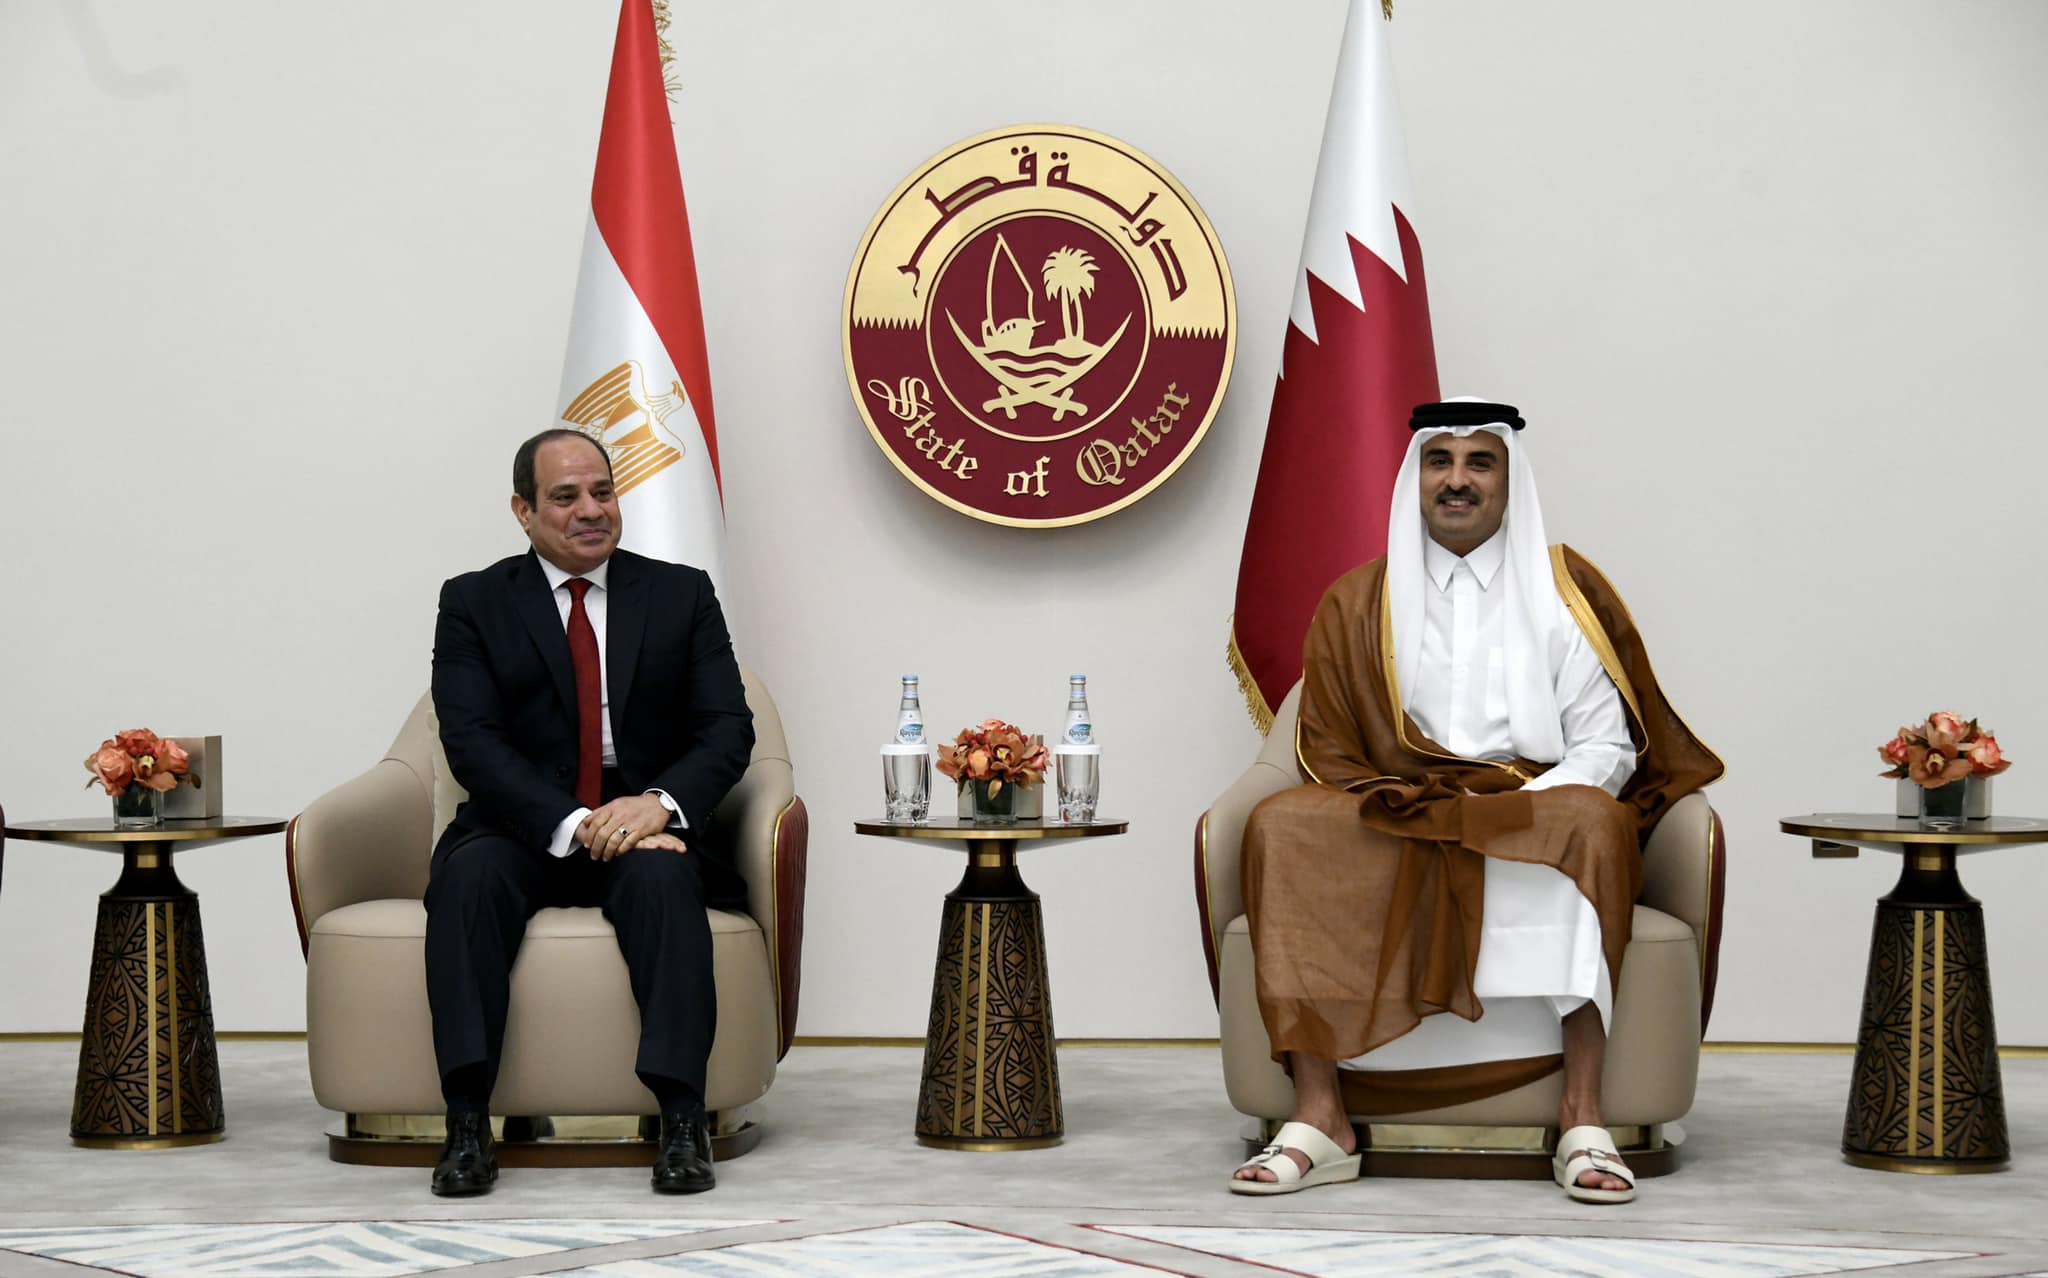 An Egyptian-Qatari summit today between President El-Sisi and Sheikh Tamim to discuss joint cooperation and developments in regional and international issues